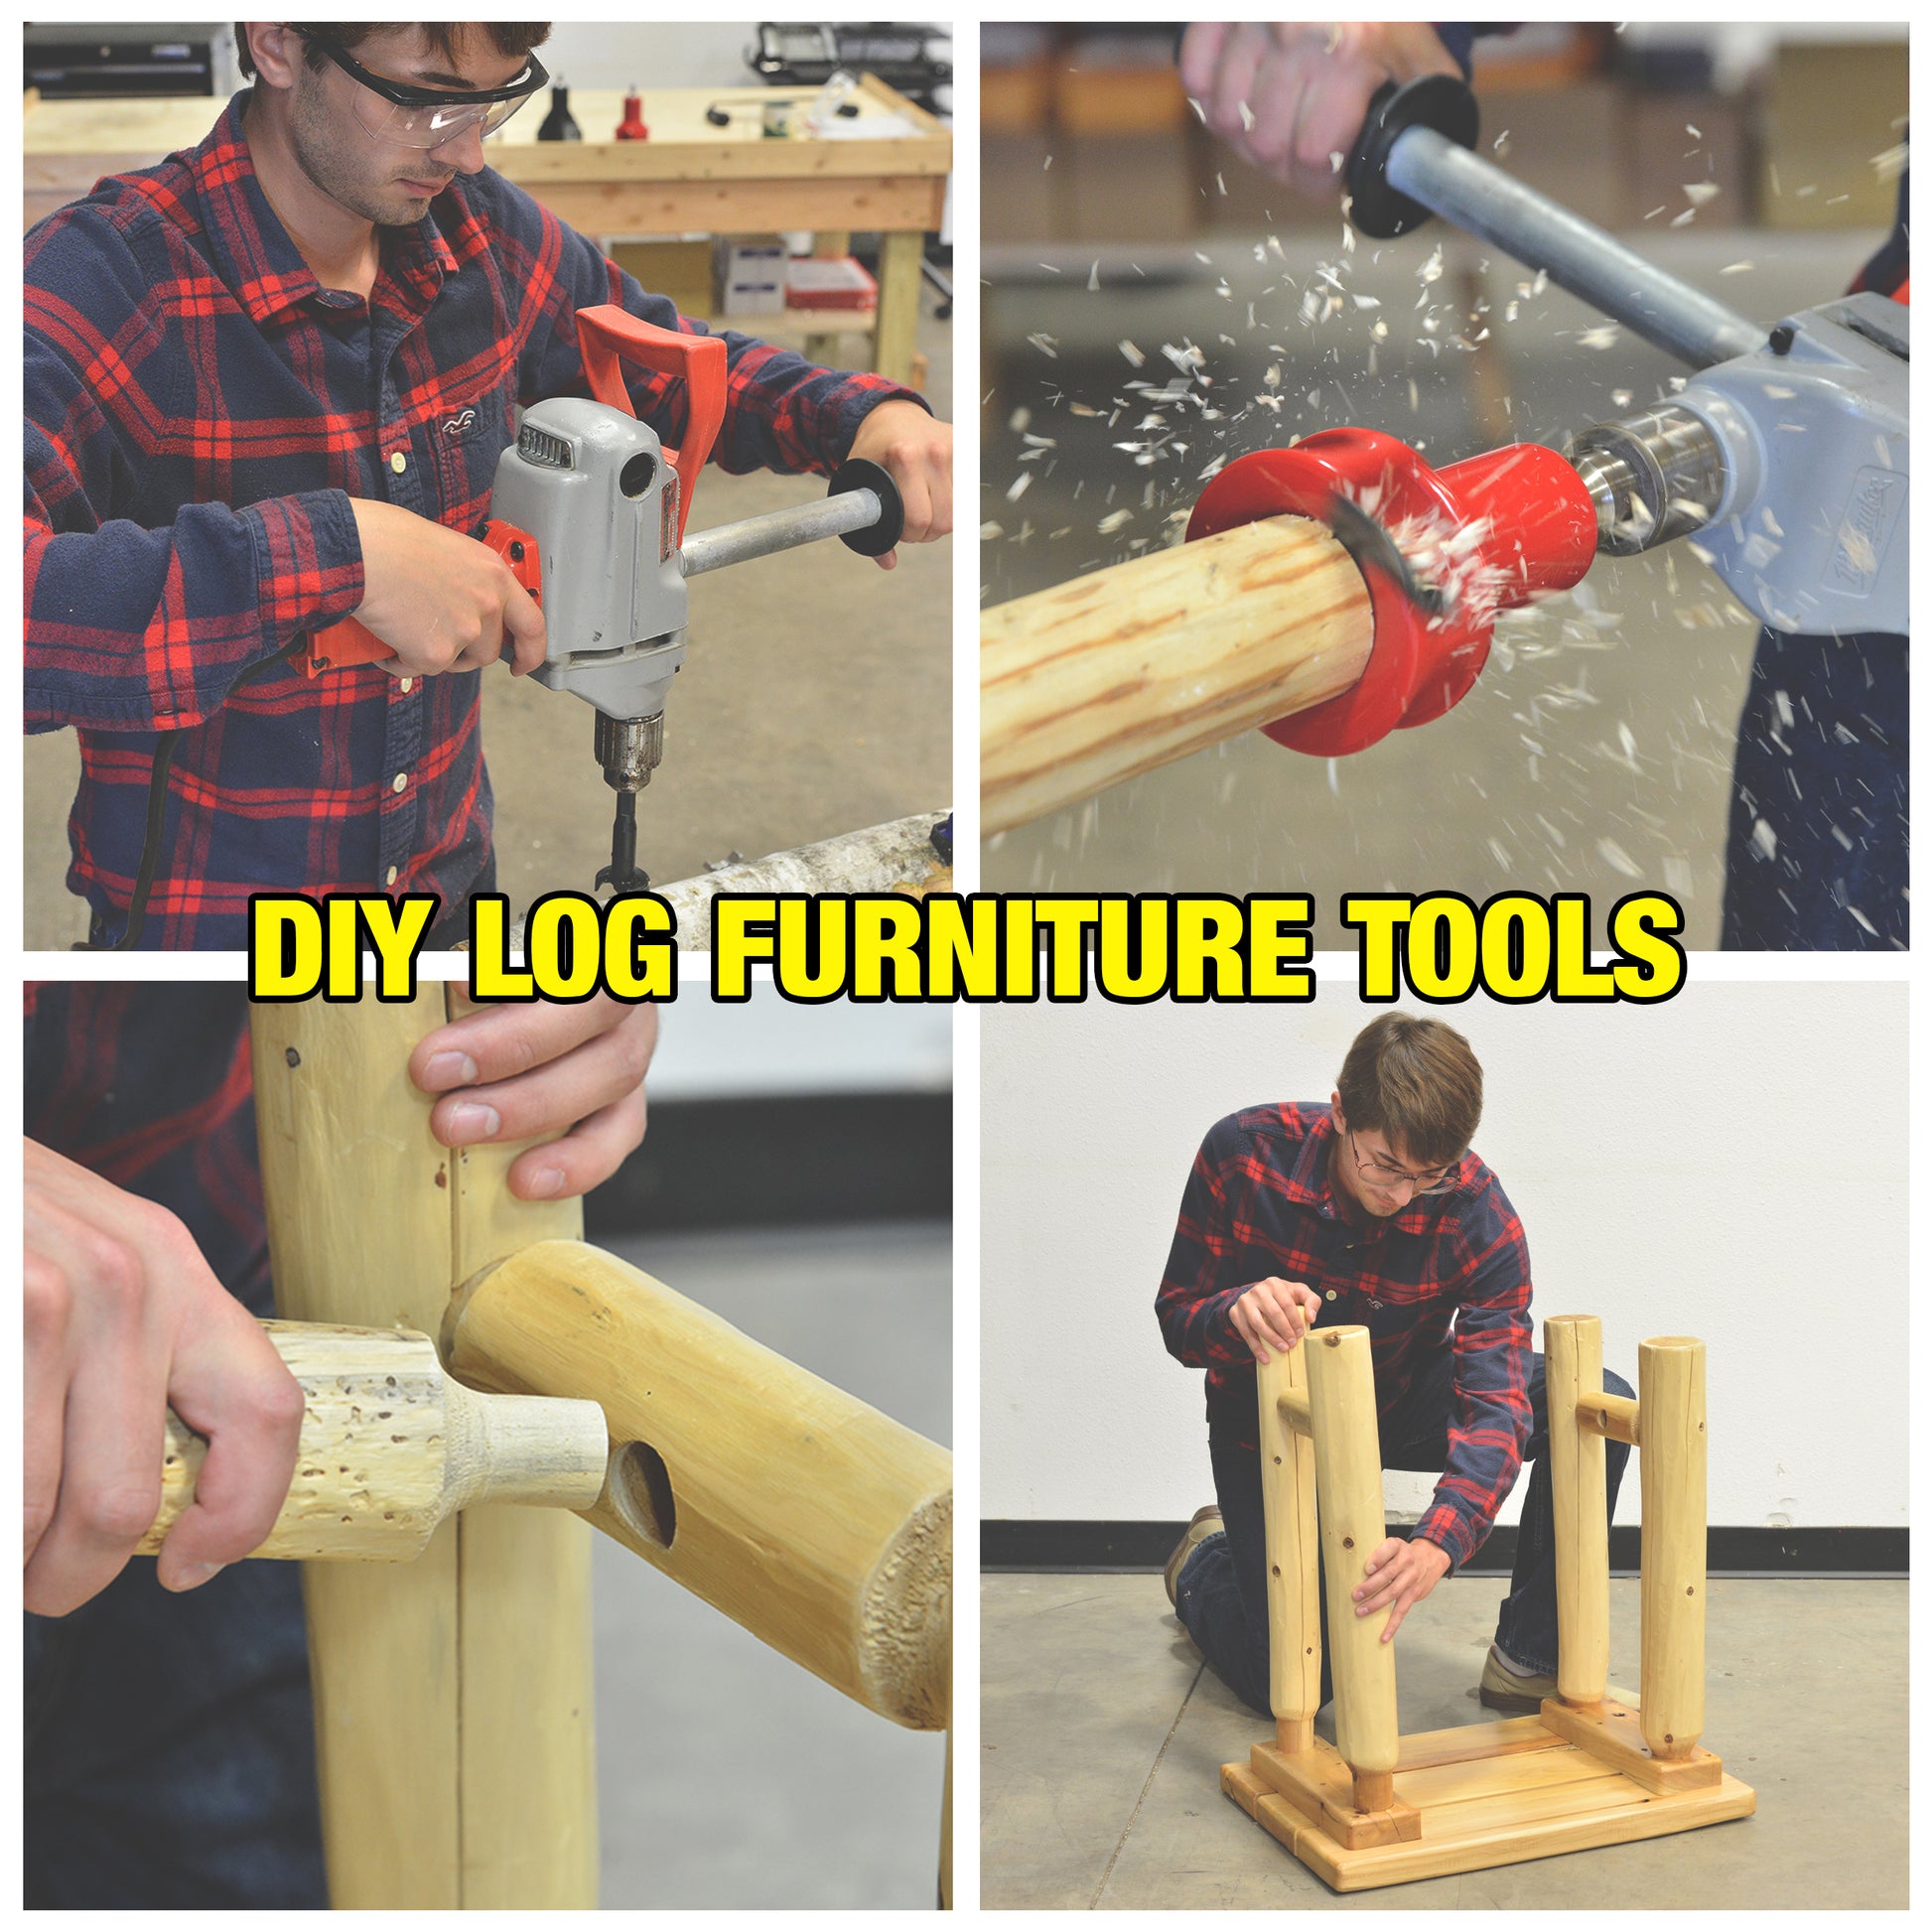 Image collage of a man cutting mortise and tenon then putting together a small table